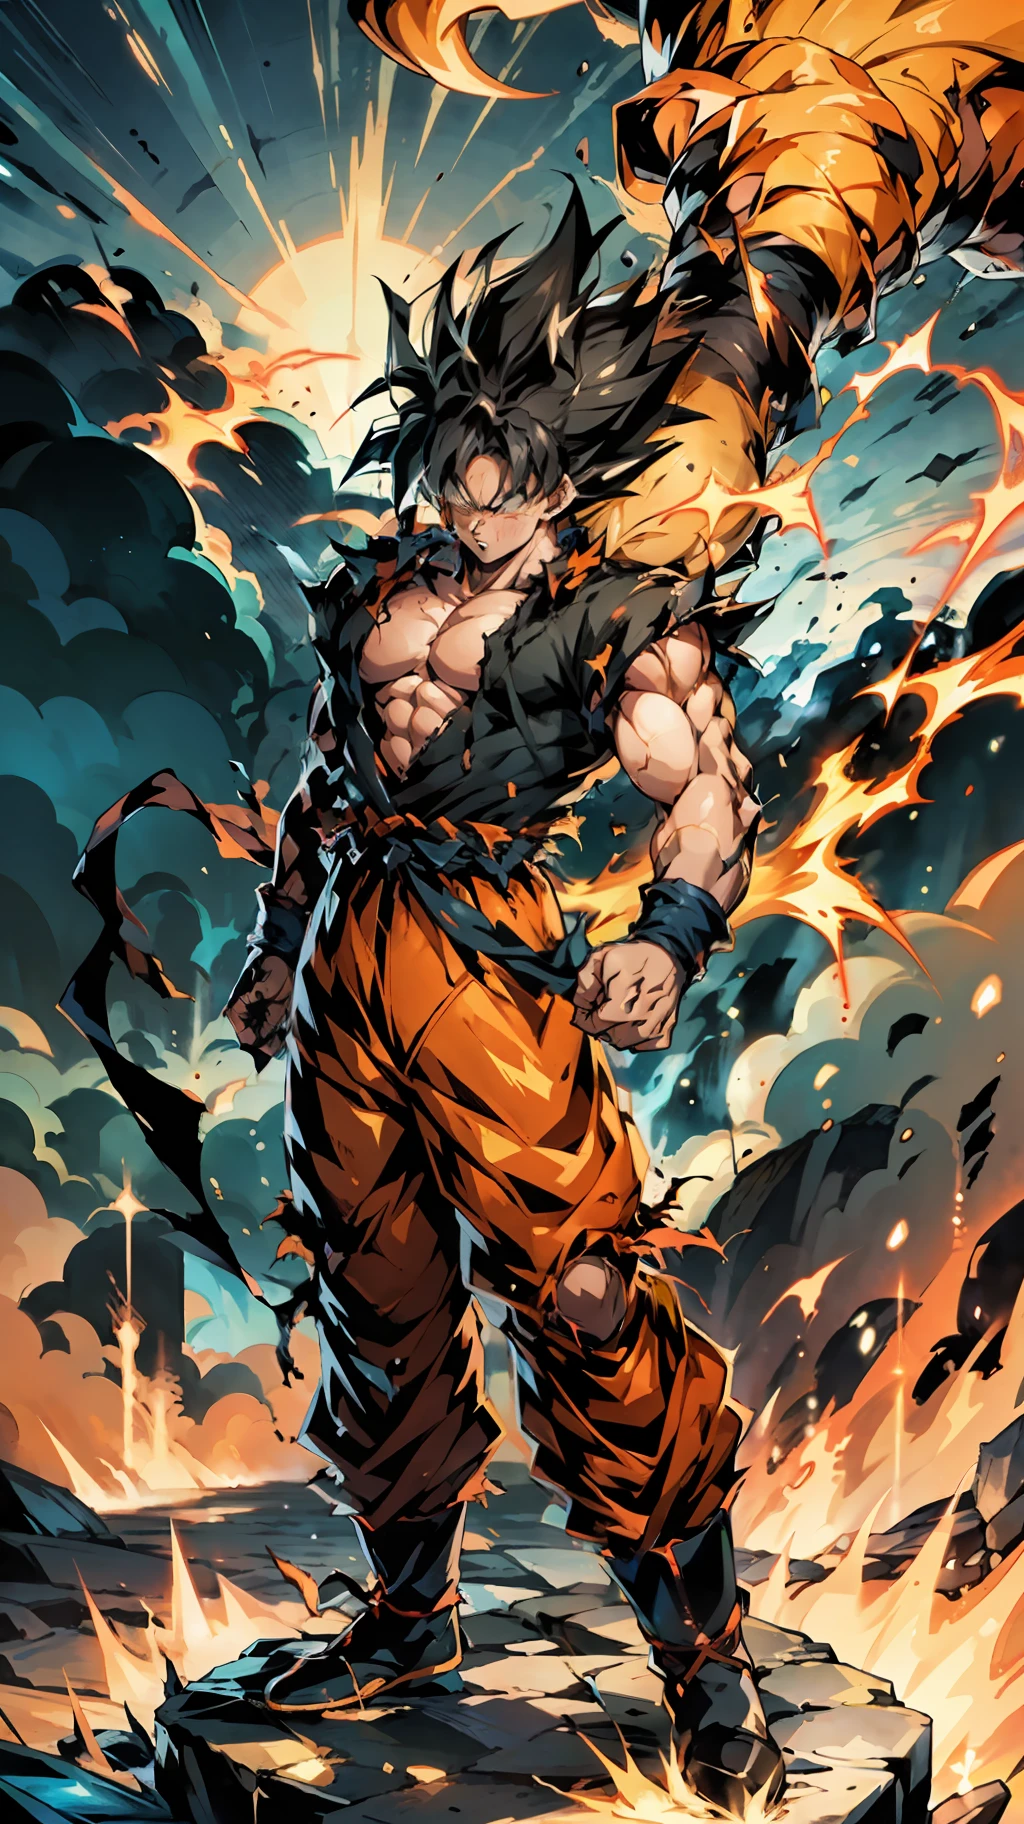 1male, solo, The Super Ice Saiyan unleashes huge energy waves that shatter the starry sky and generate huge shock waves. Standing on the ice dragon, the background is the rainstorm meteor universe. Energy waves are a mixture of orange tones with swirling patterns. (Ice Magic: 1.2), (Epic: 1.3), (Chaos Ingredients: 1.2), (Metal: 1.1), (Dark orange: 1.1), (Comic Book: 1.2), ((3D)), (((Actual))),